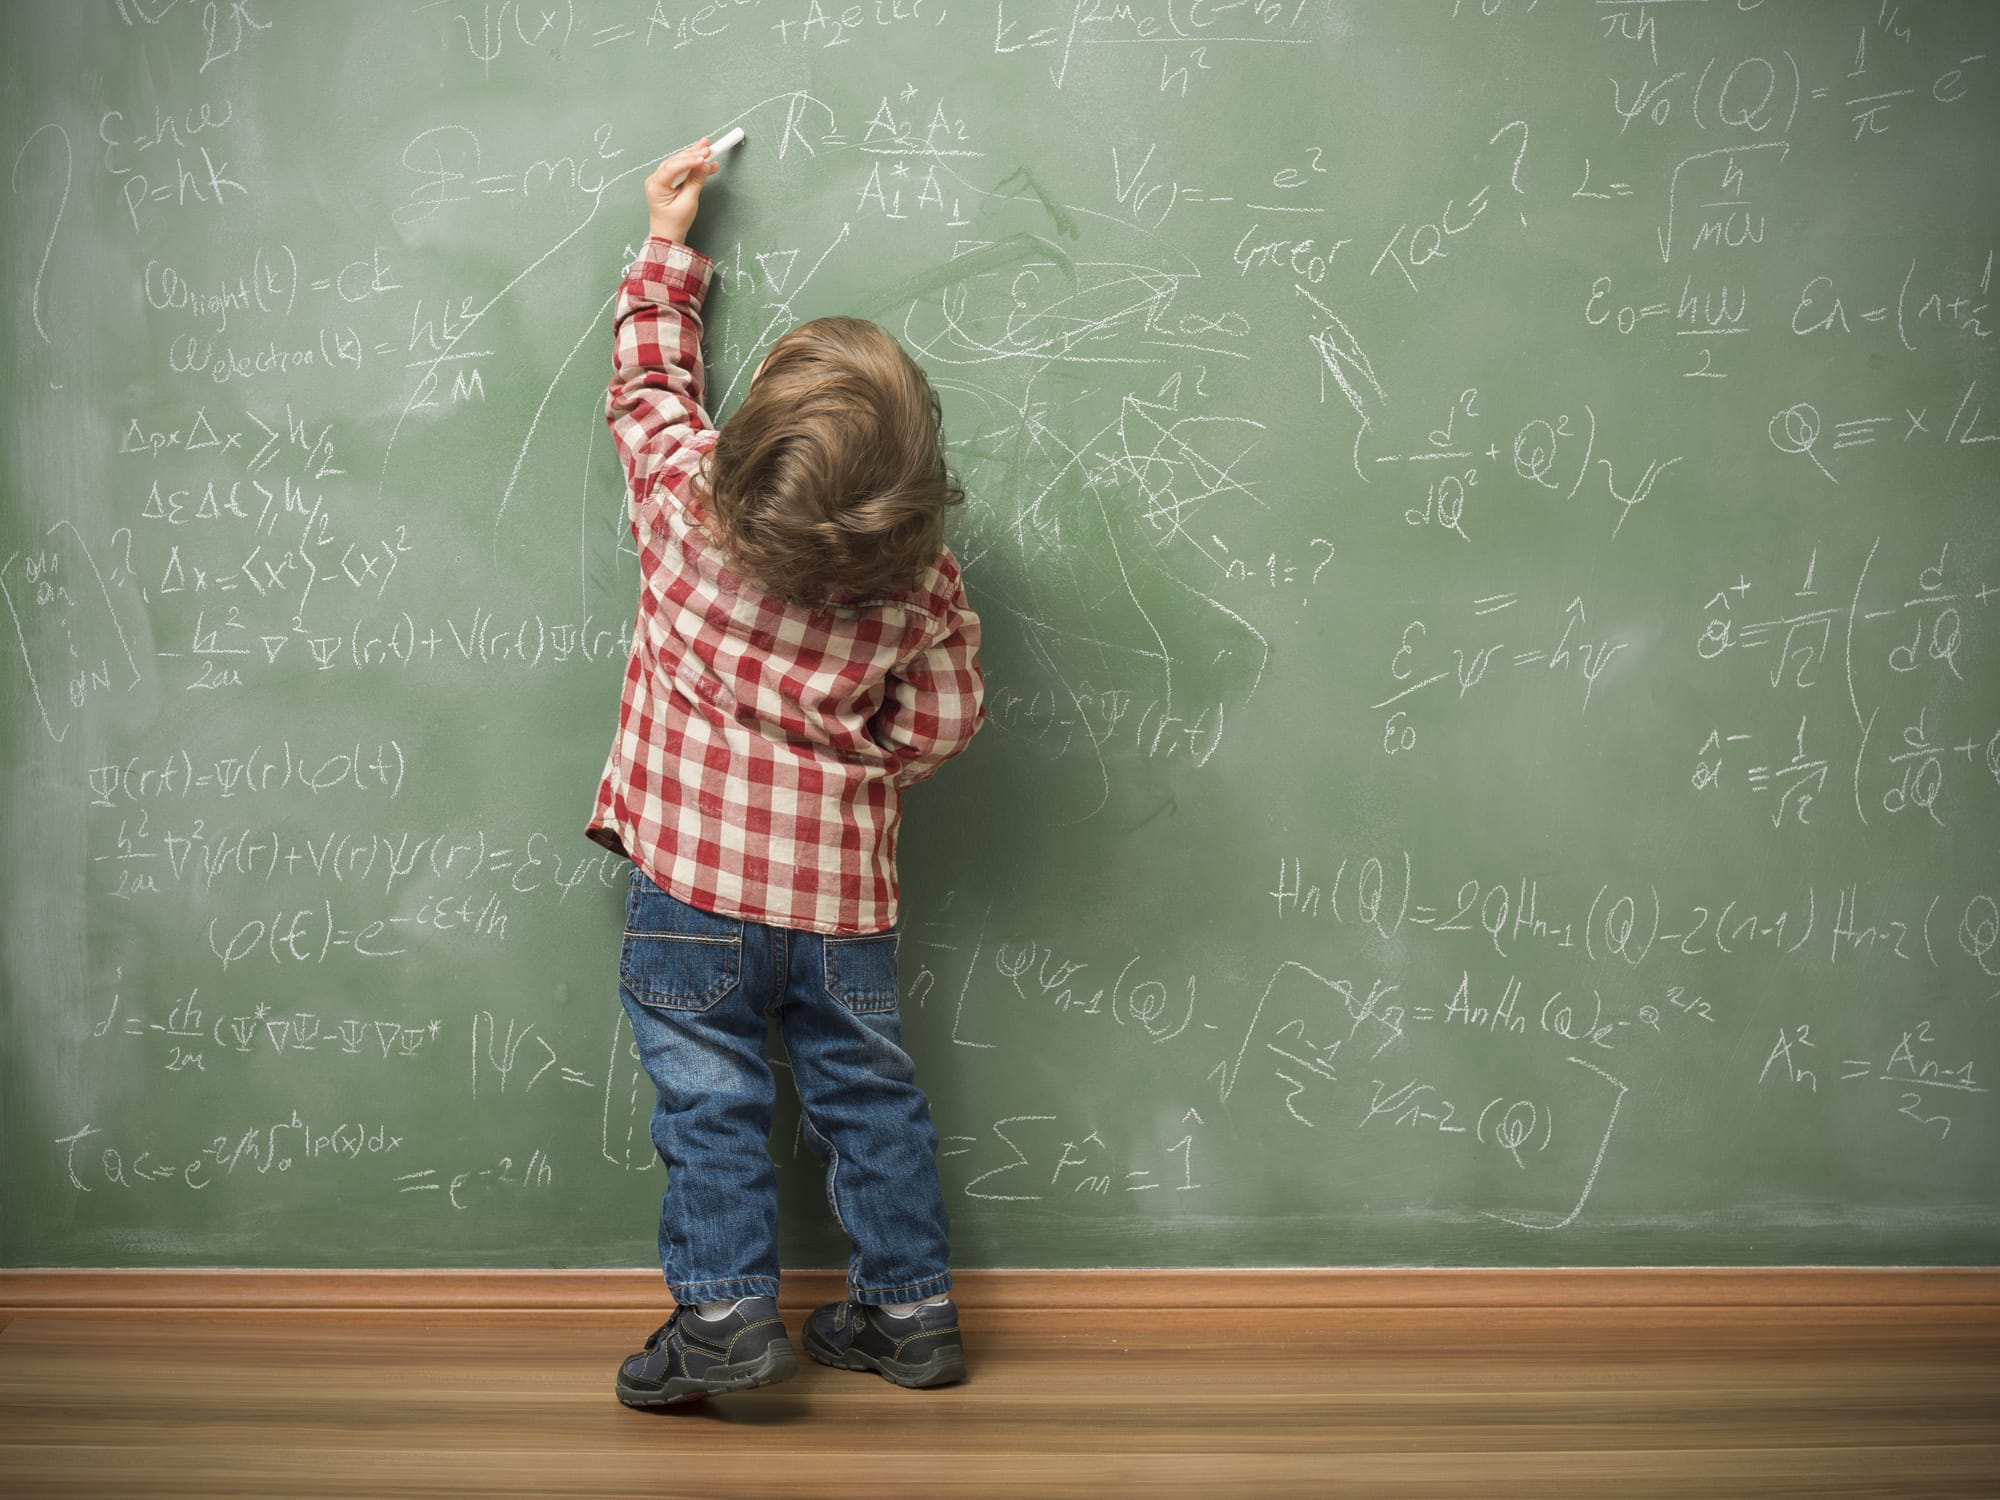 Little boy writing on green blackboard with math formulas written on. He is wearing a red plaid shirt and standing on the left side of frame. The green board is full of mathematics and physics formulas. He is seen in full length and holding chalk in left hand.